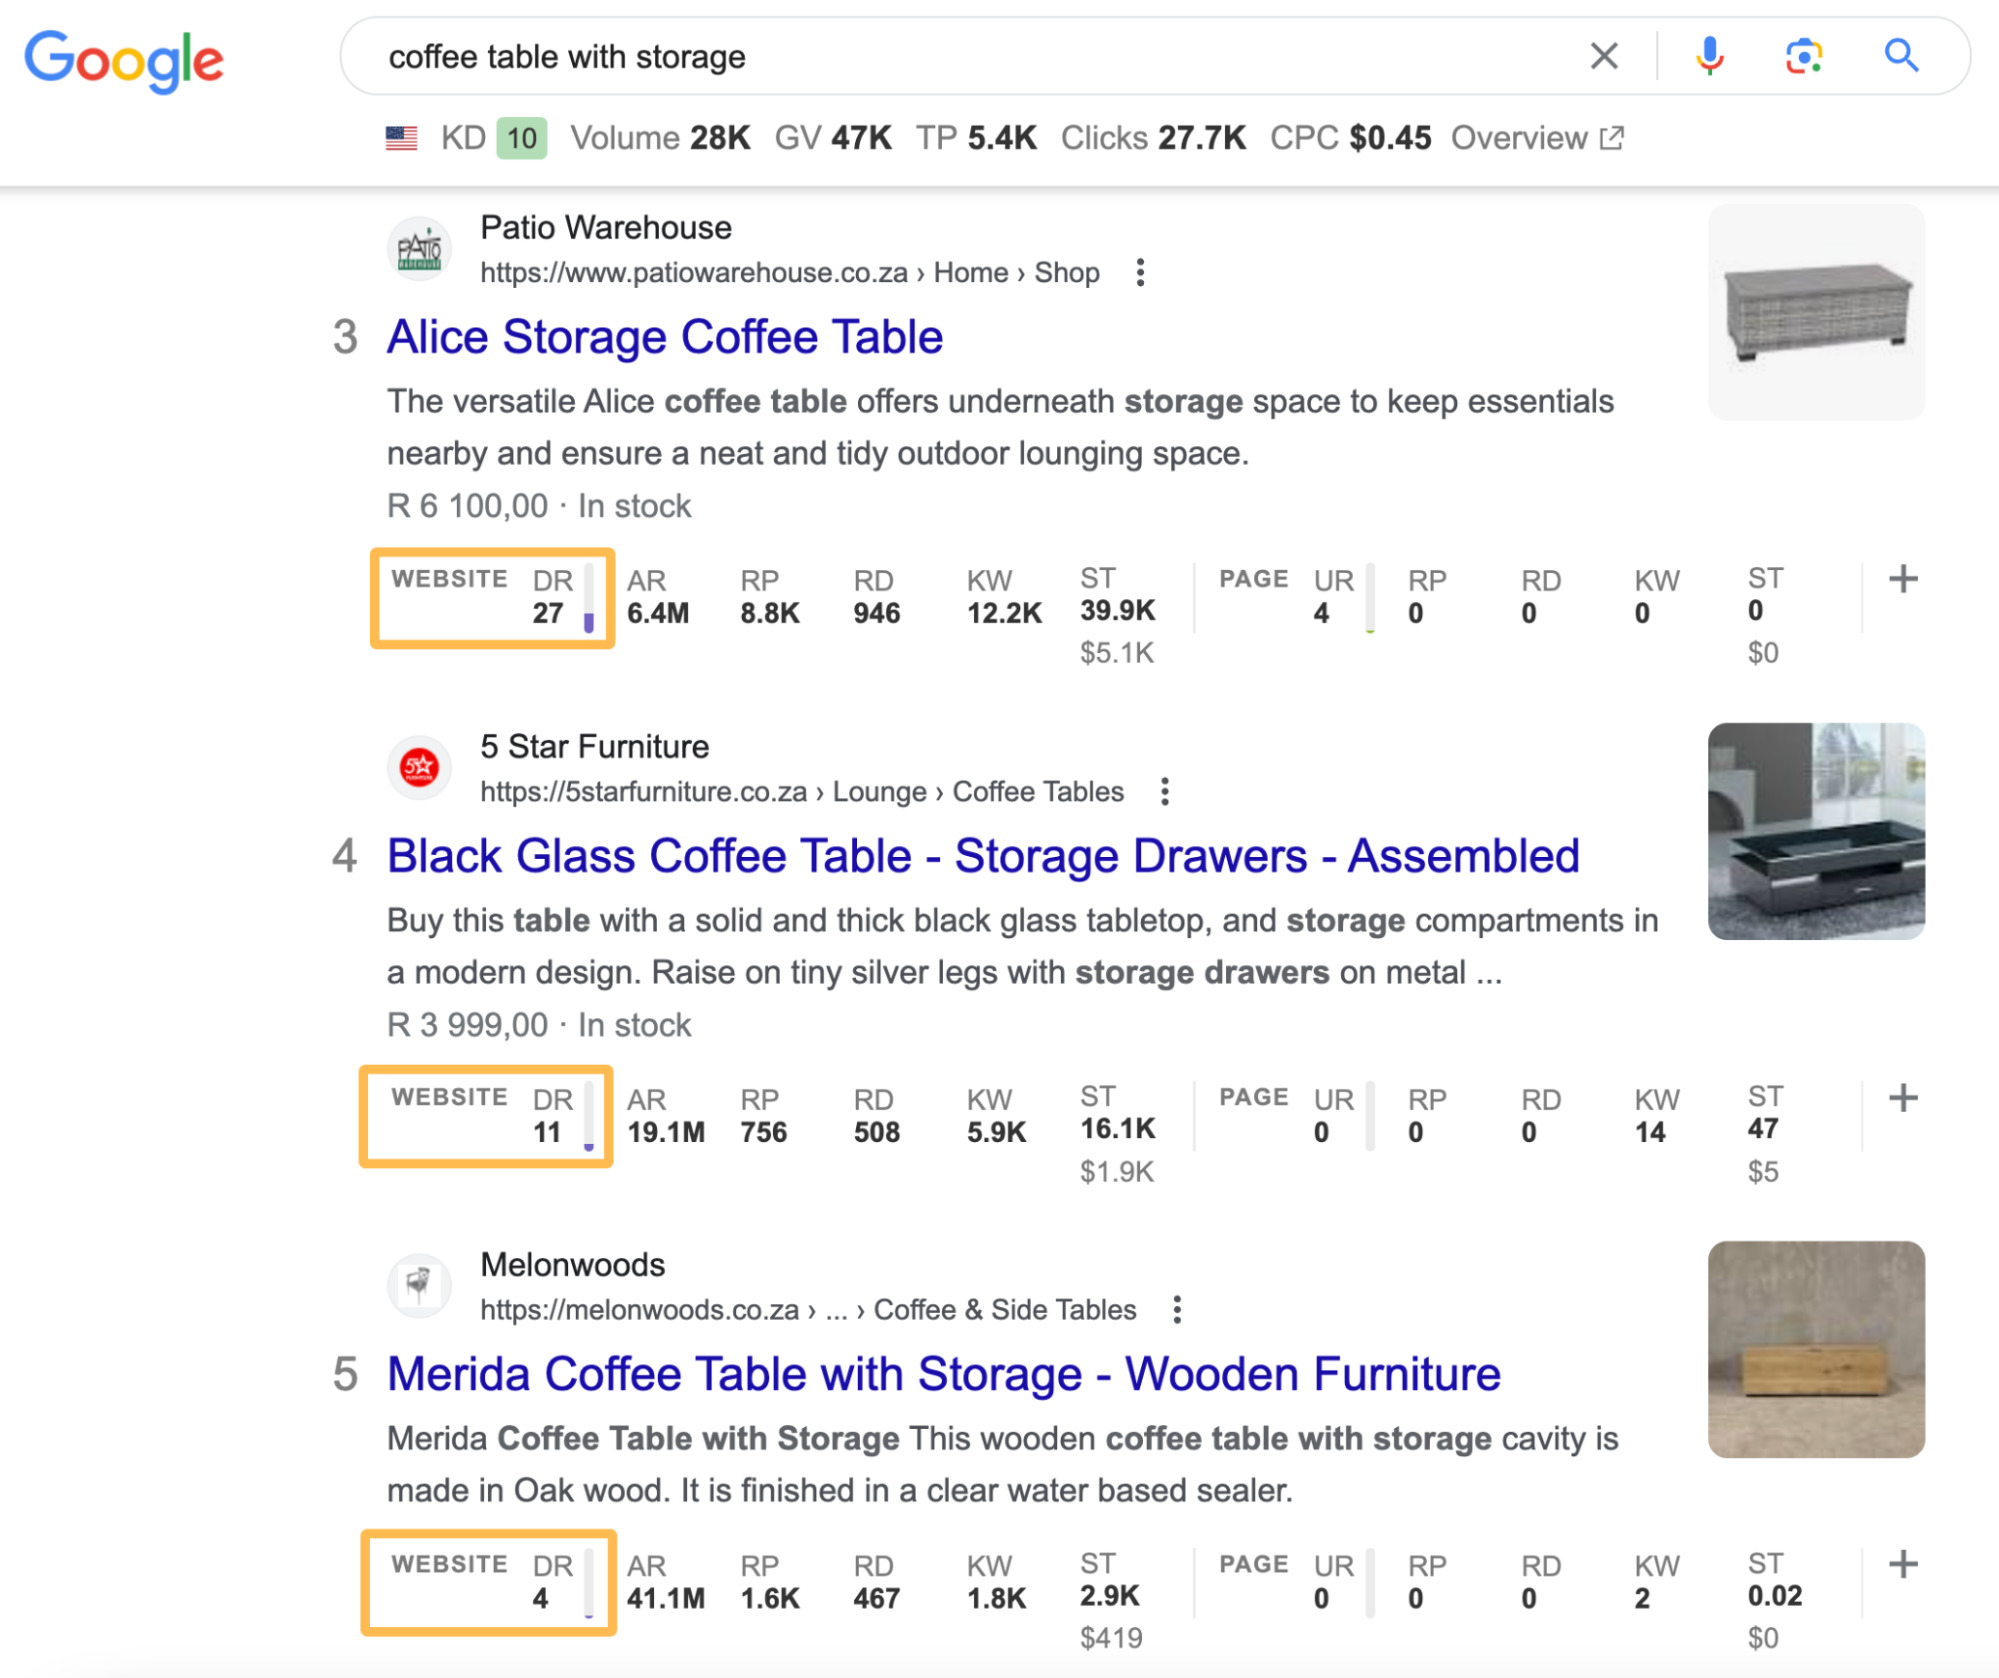 Google SERP for "coffee table with storage" showing DR data from Ahrefs' SEO Toolbar